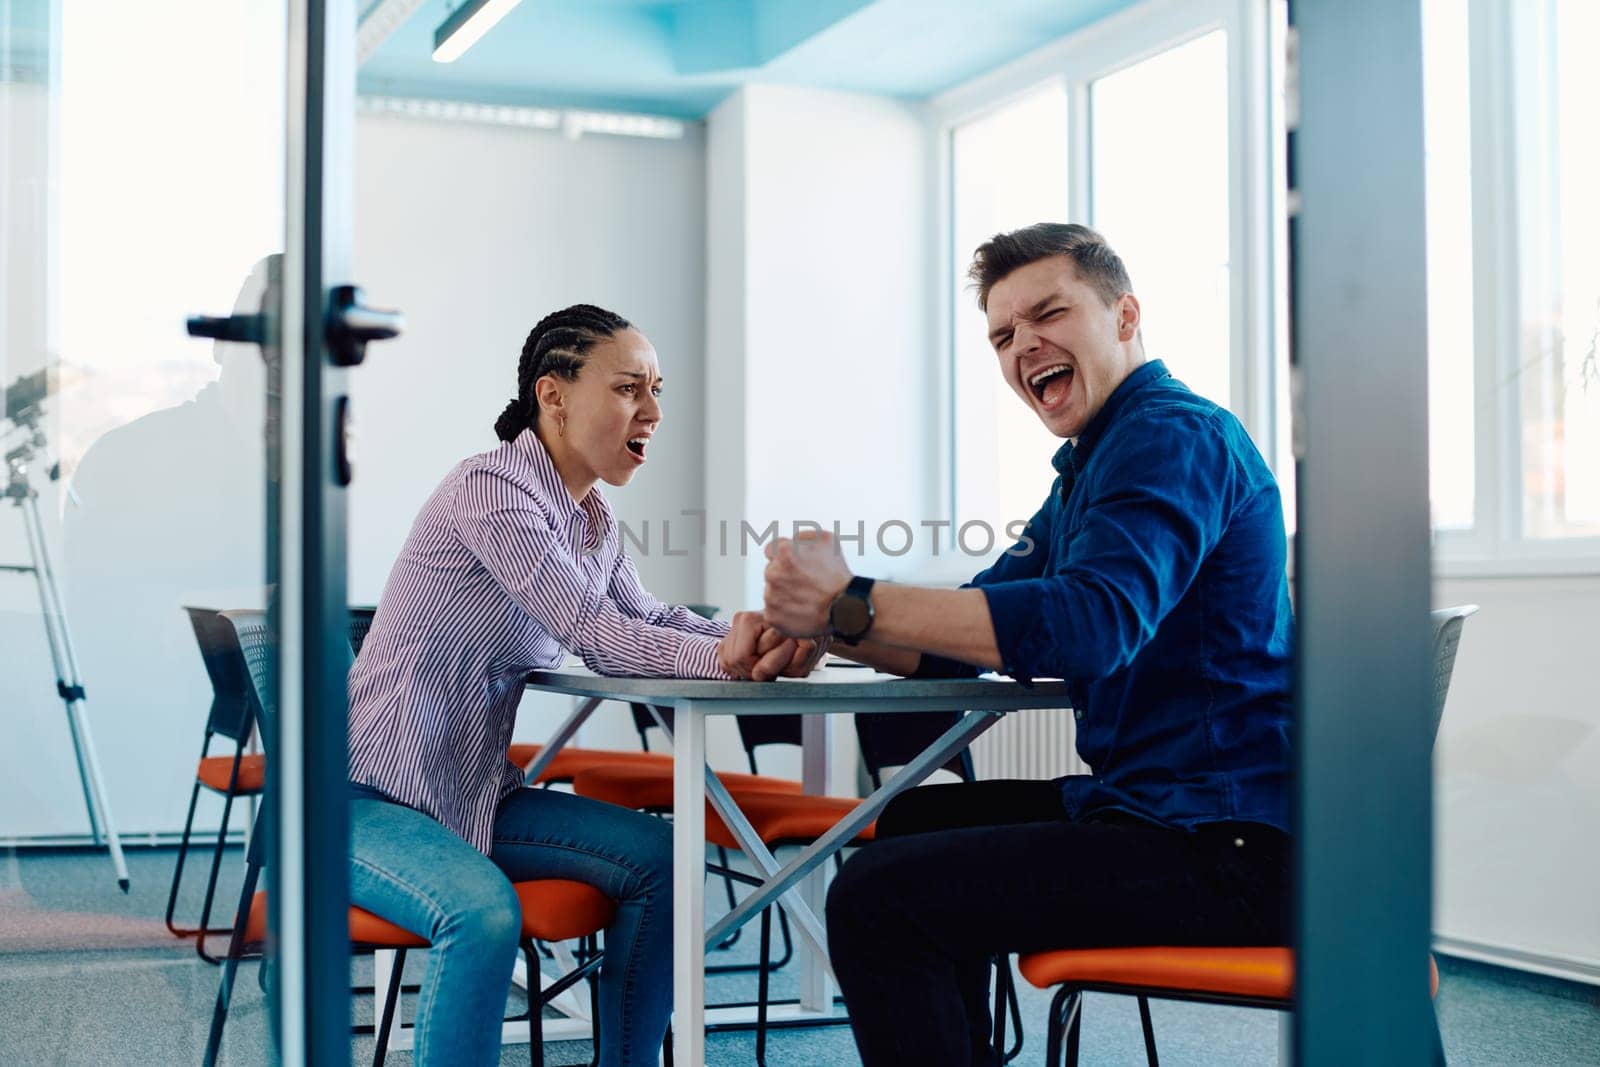 In a modern startup office, a businessman and a businesswoman business colleagues engage in a symbolic arm-wrestling match, reflecting teamwork, competition, and innovation in their dynamic workplace. by dotshock